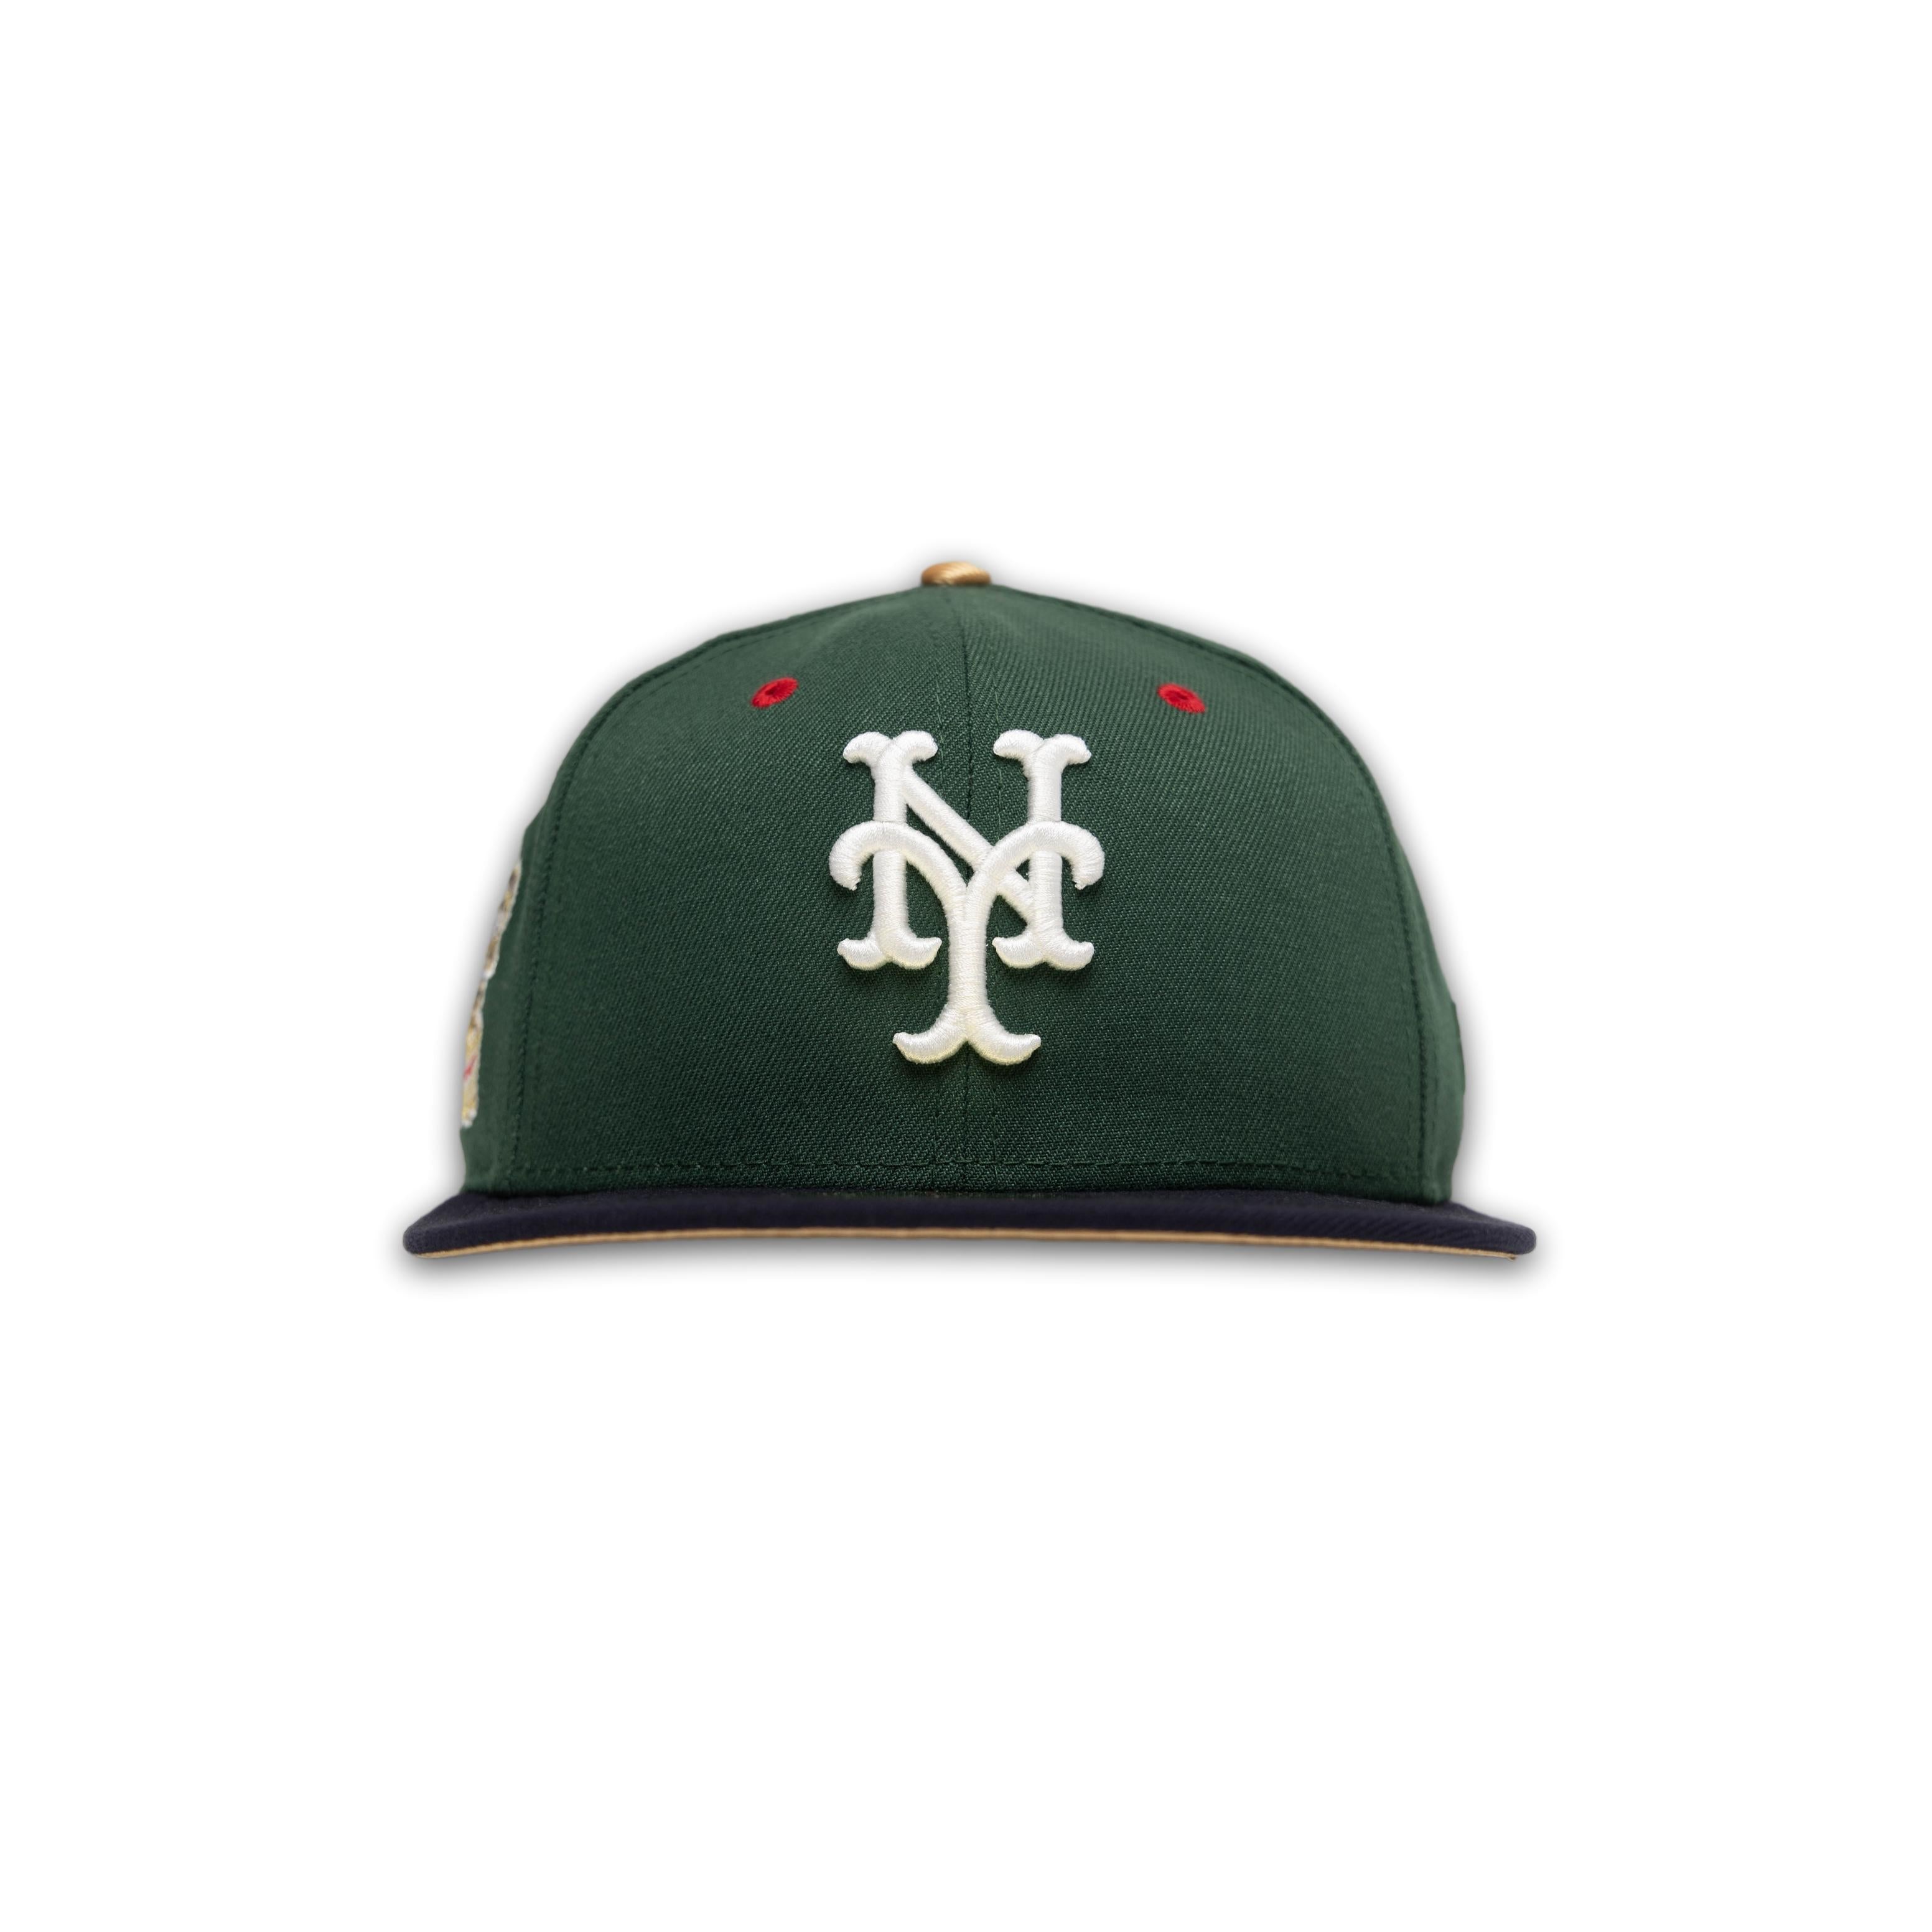 New Era New York Mets 60th Anniversary Patch Fitted